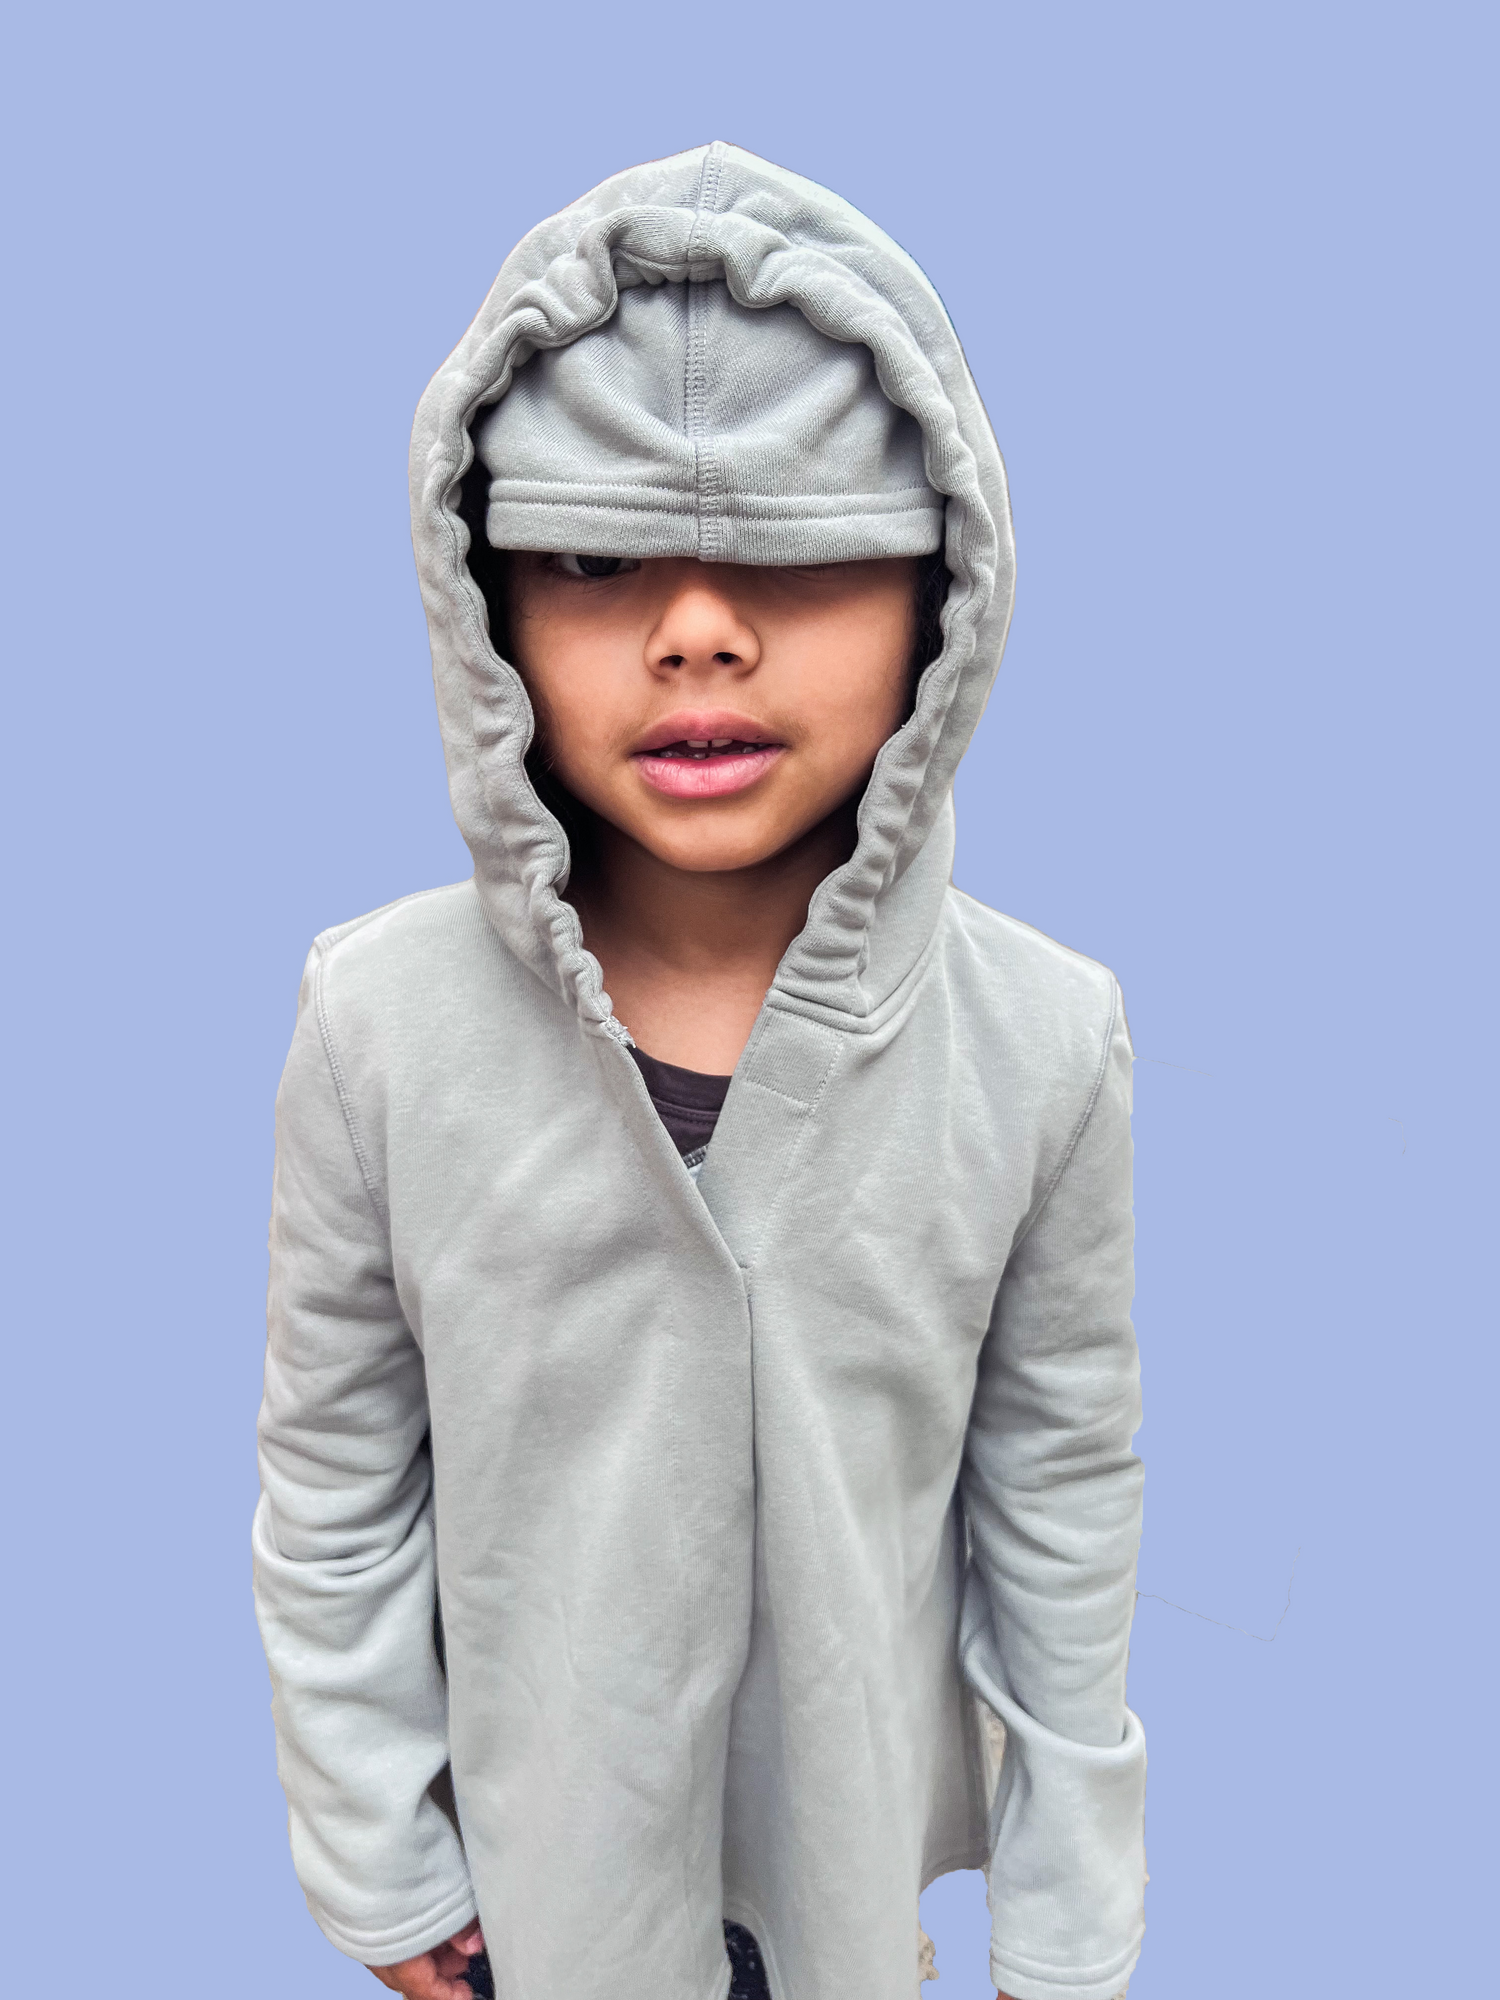 Sensory friendly hoodie for visual and sound sensitivity. Eye mask down to prevent sensory overload